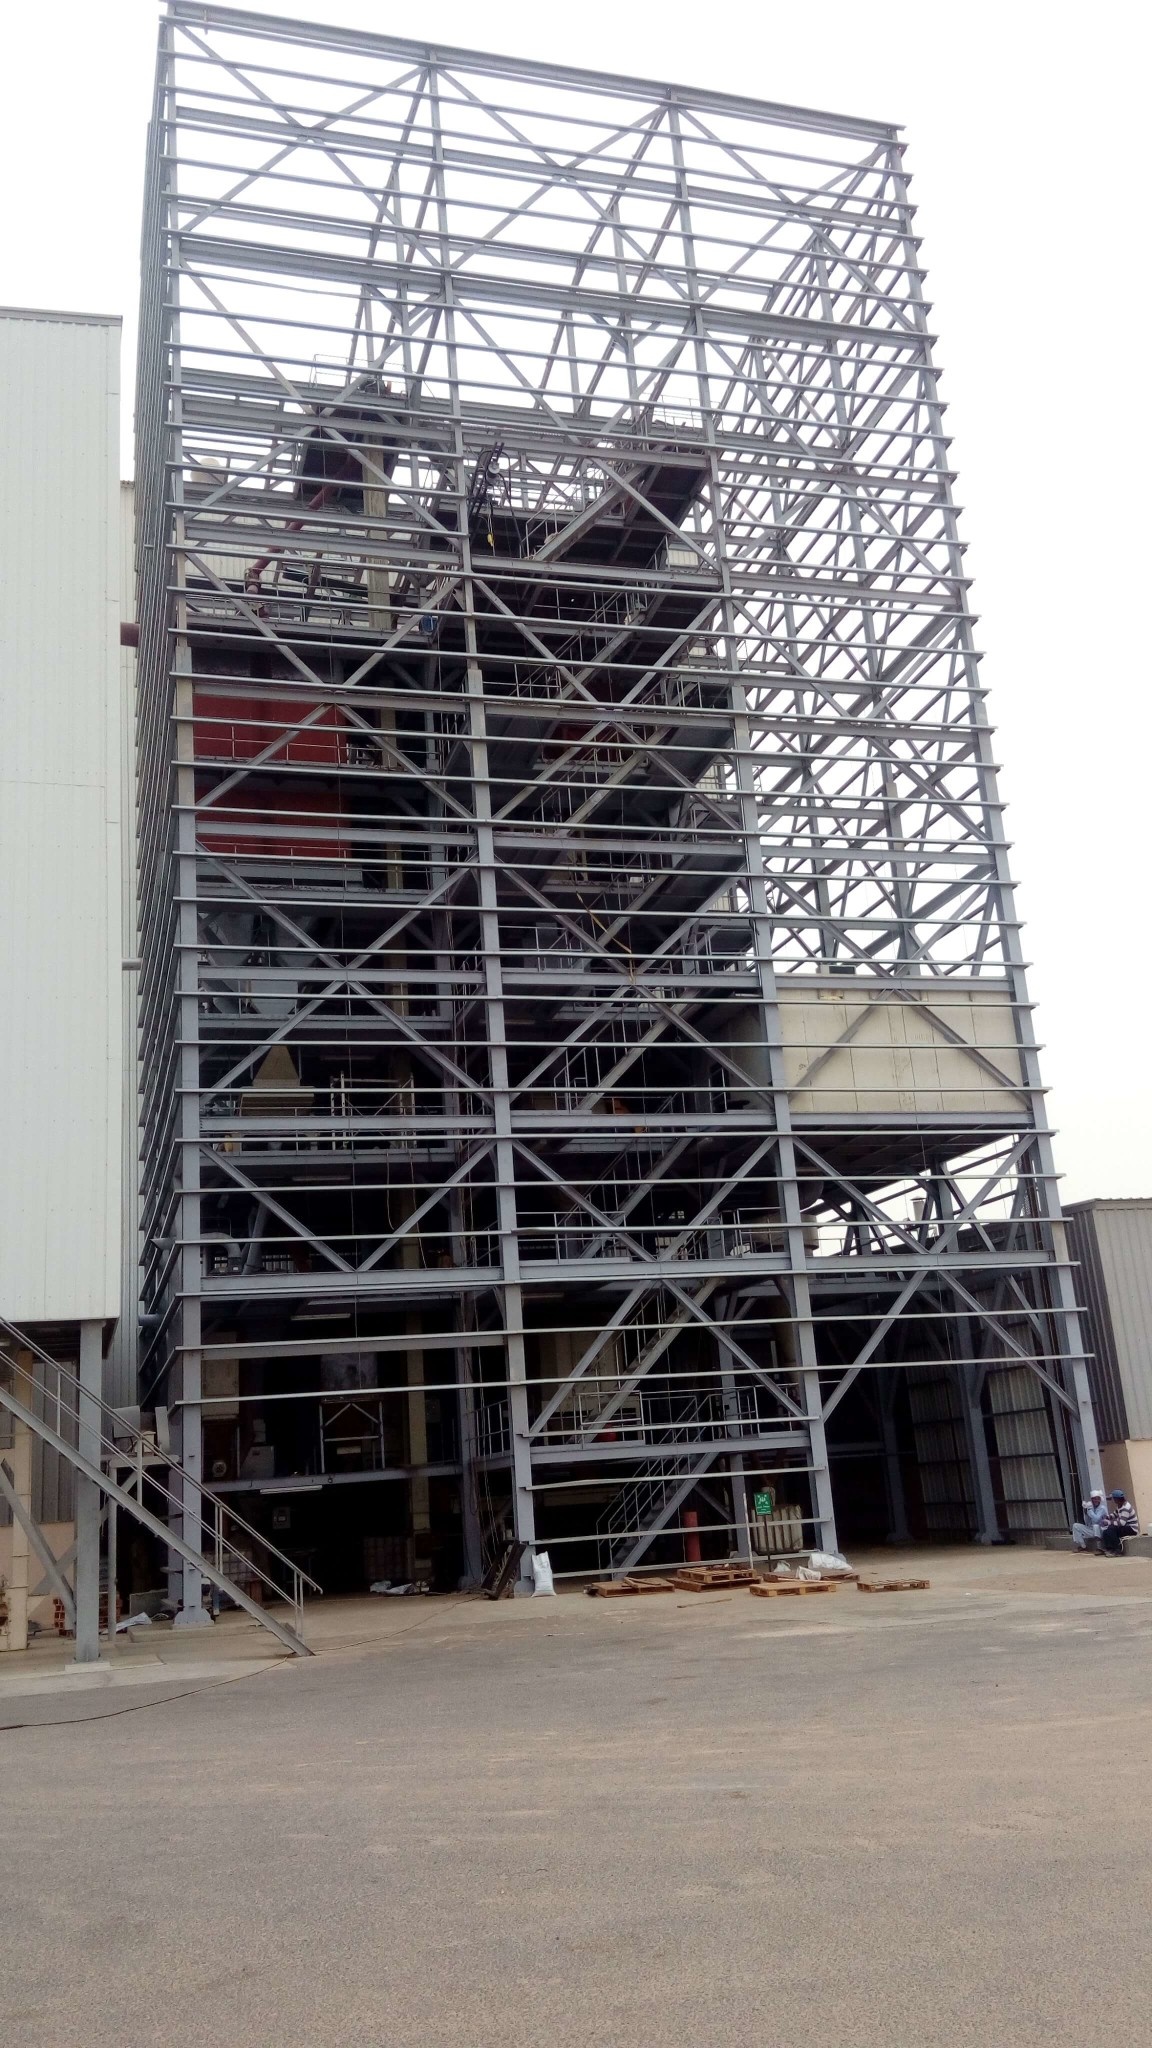 Steel structures of the machine tower during installation